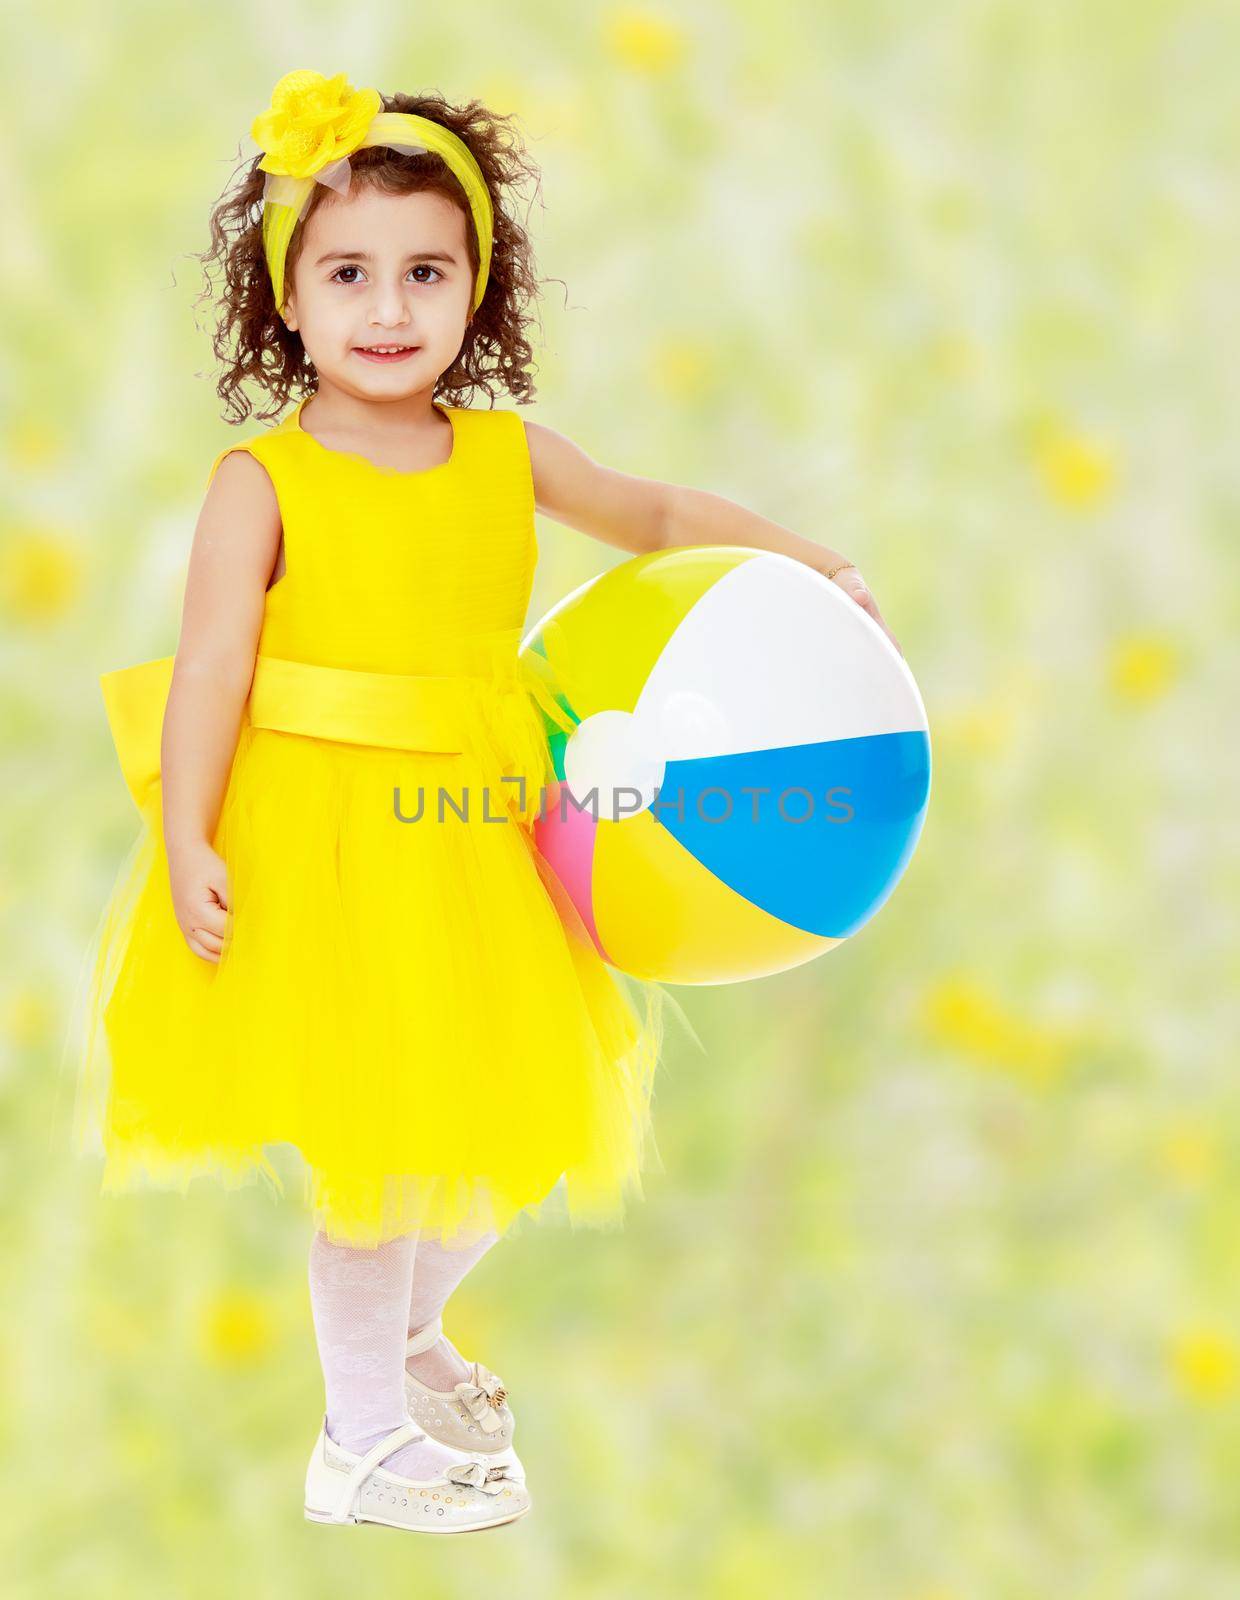 Cute curly girl in a bright yellow dress and bow on her head holding the ball. Close-up.Bright,floral yellow-green blurred background.